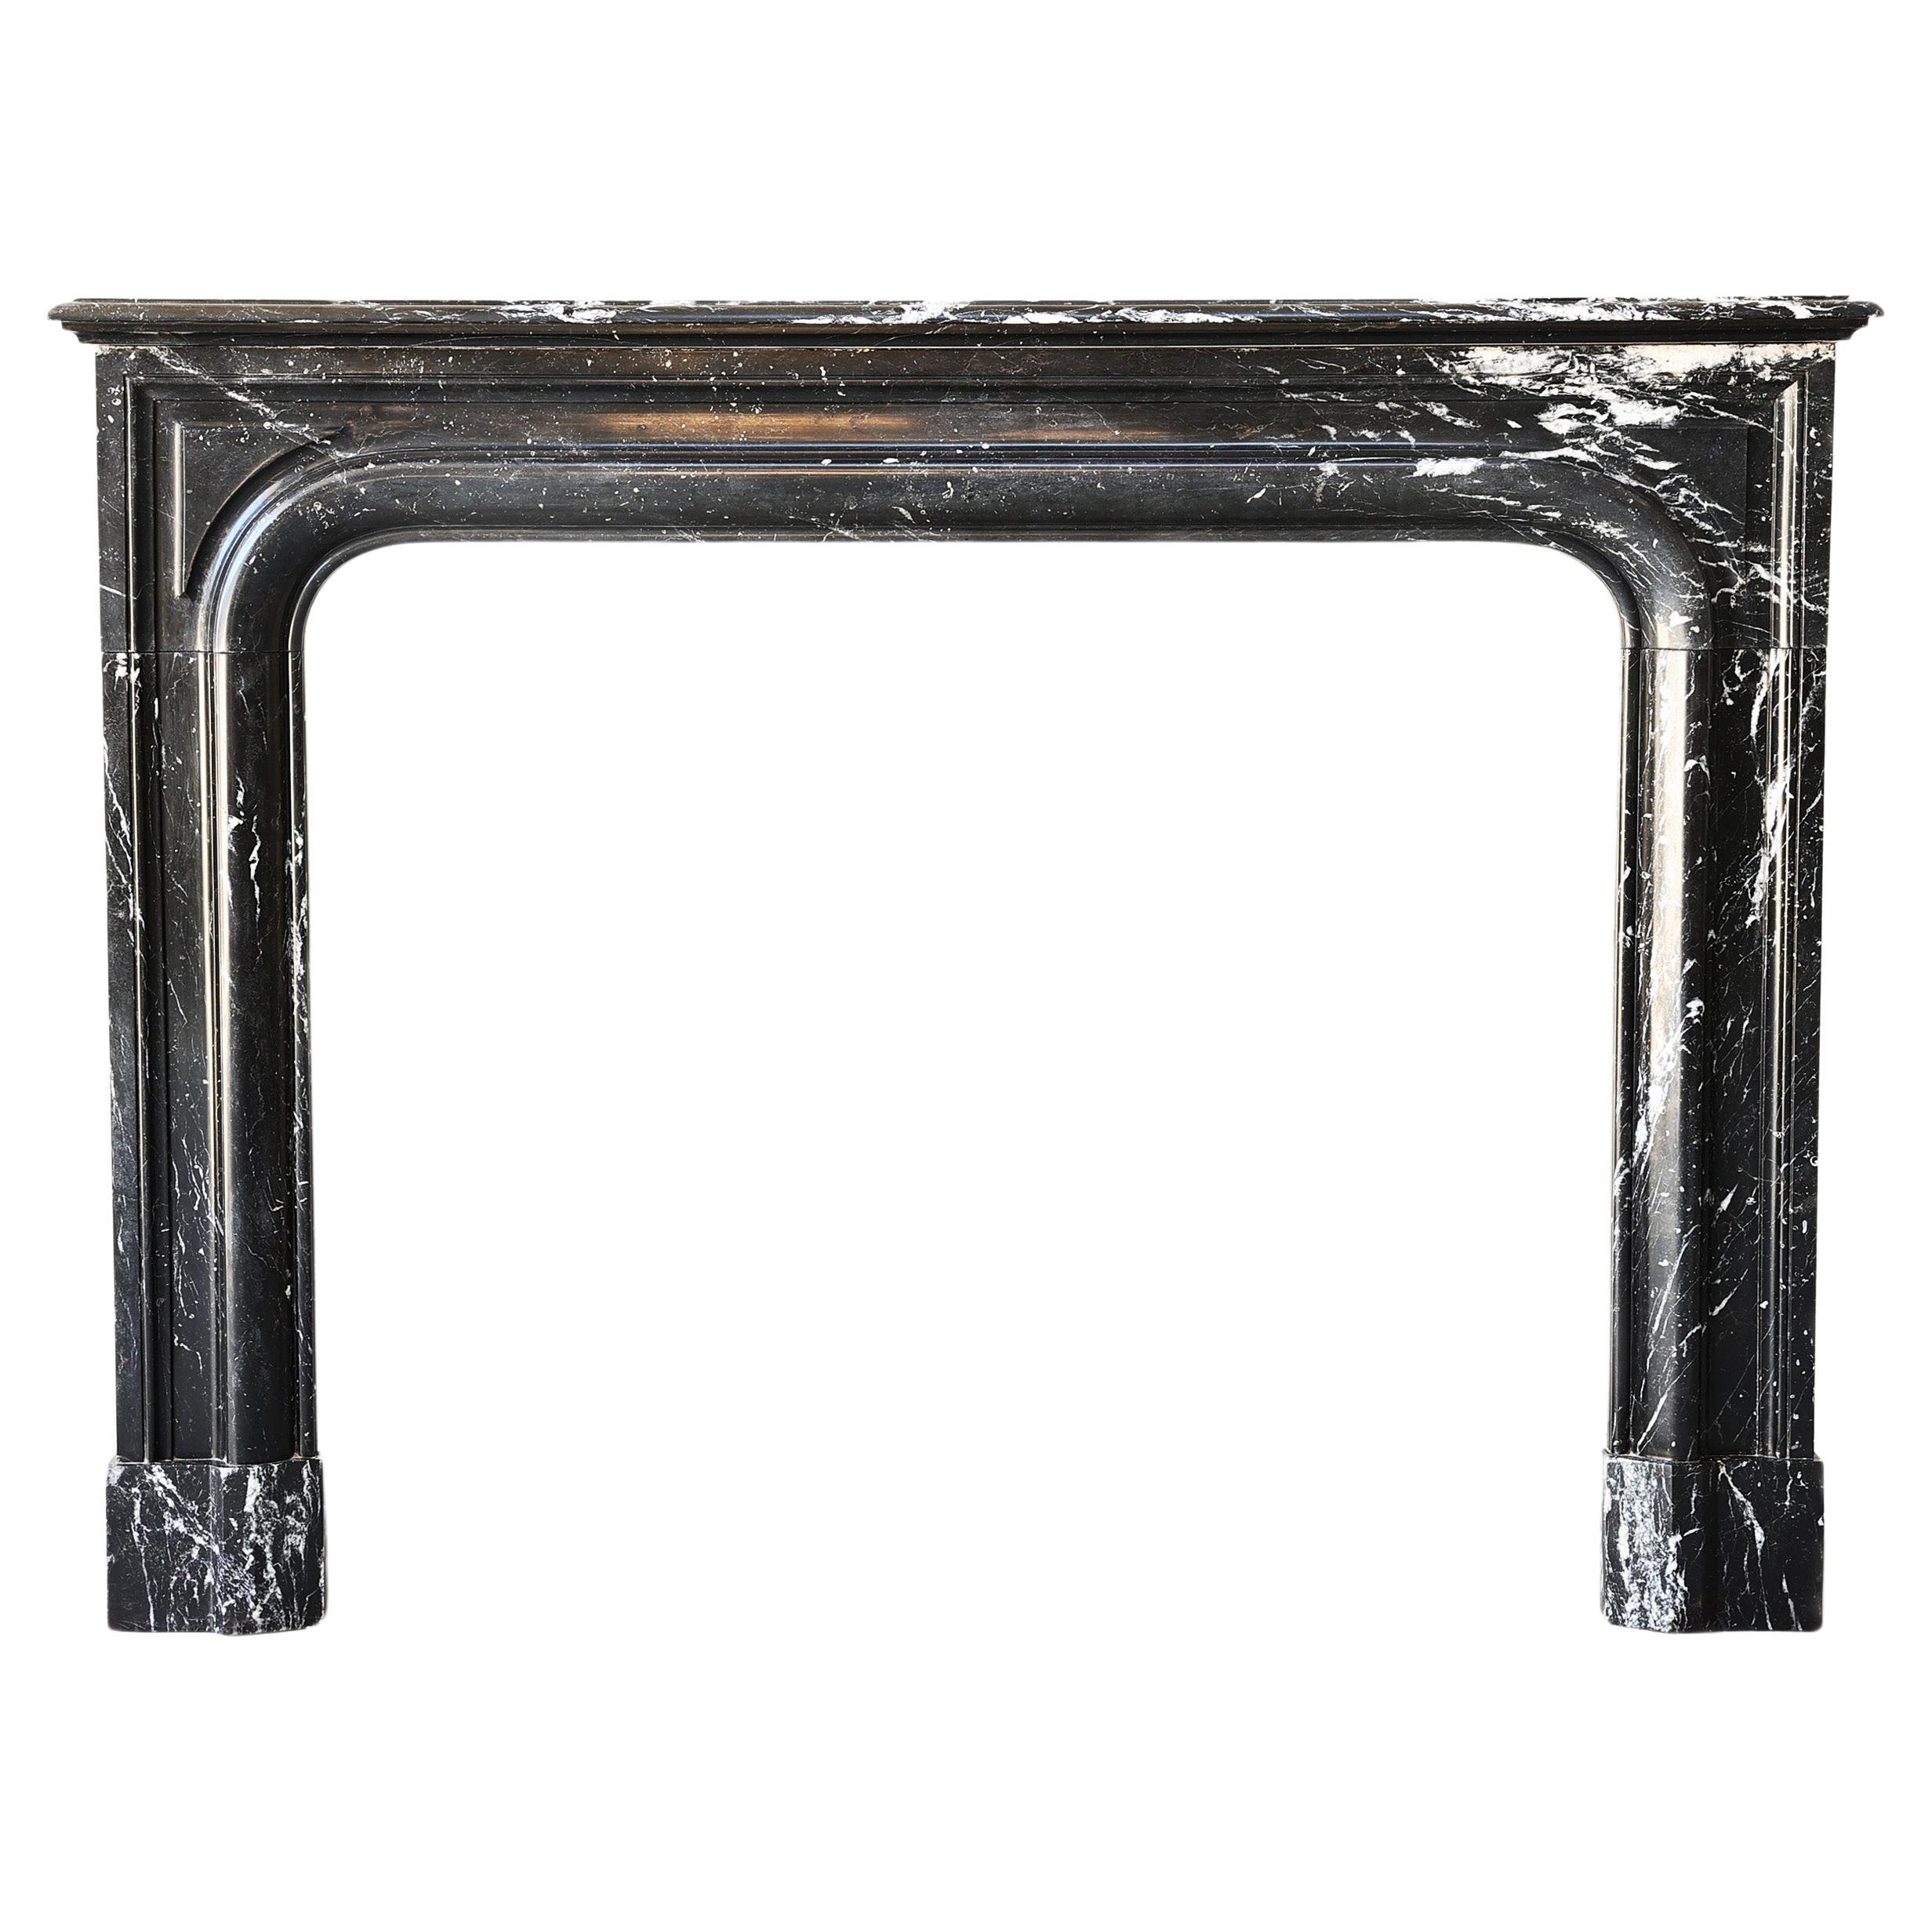 Nero Marquina marble fireplace from the 19th century in style of Louis XIV